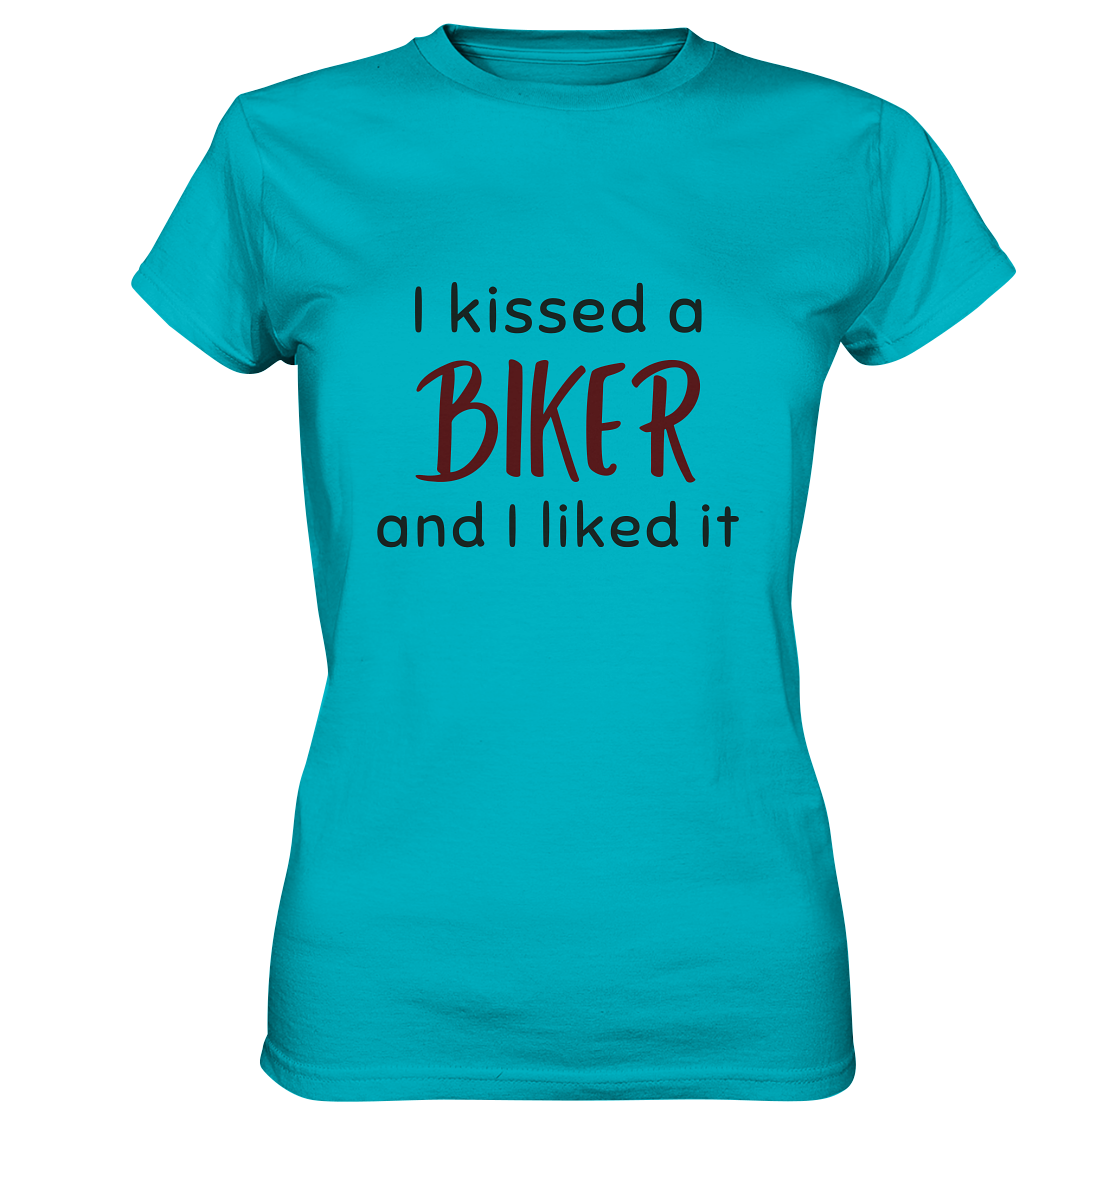 T-Shirt, Damen, ladies, spruch, quote, "I kissed a biker and I liked it", love, liebe, blue blau